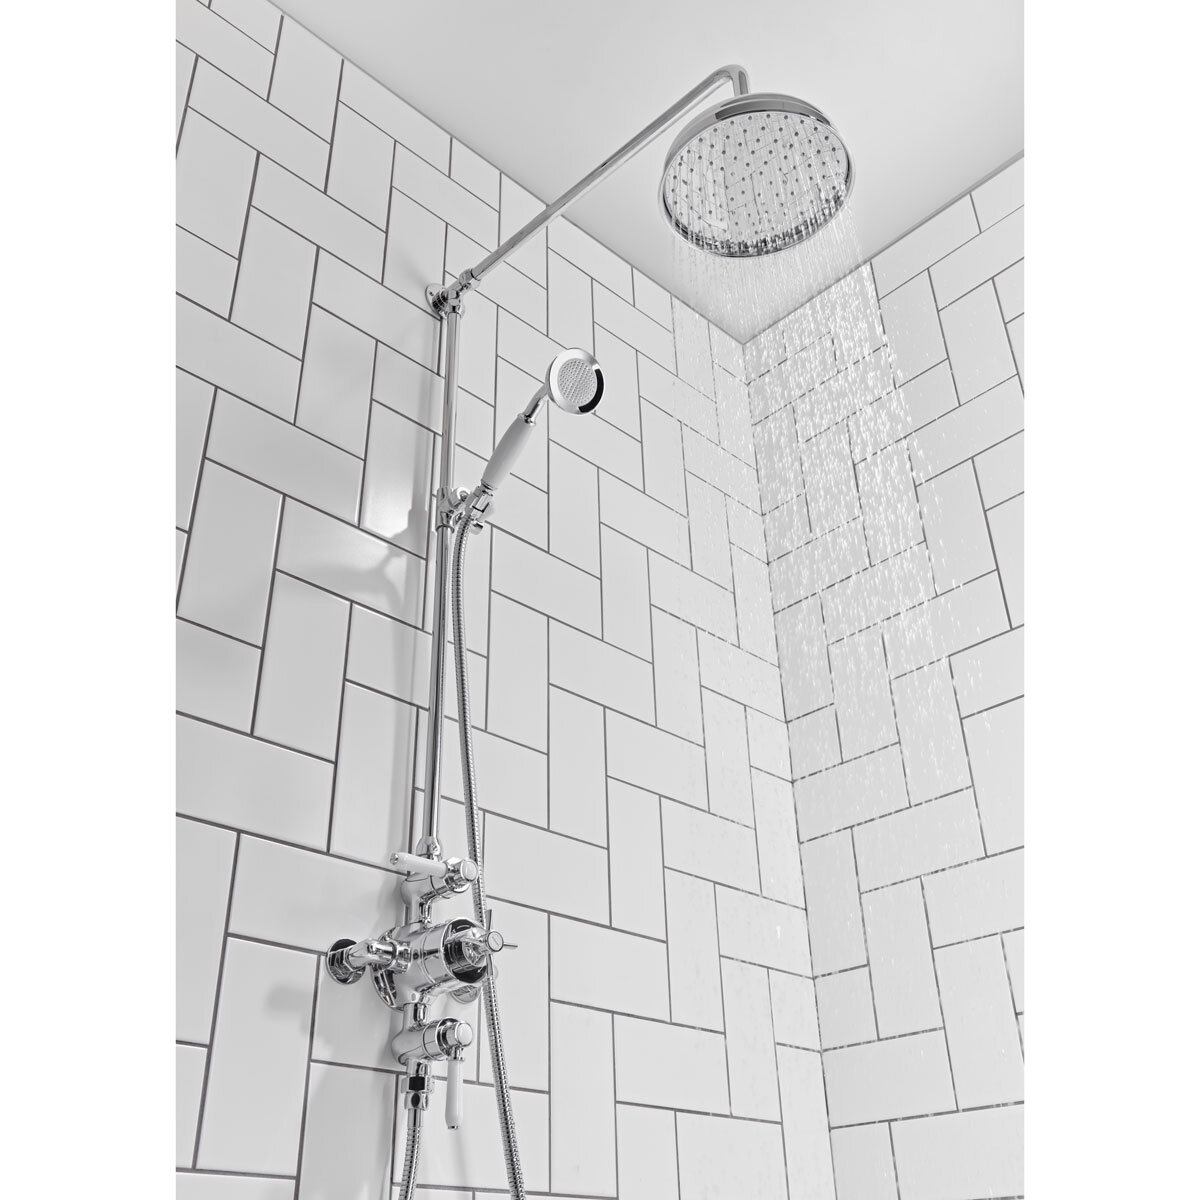 Lifestyle image of shower looking from below